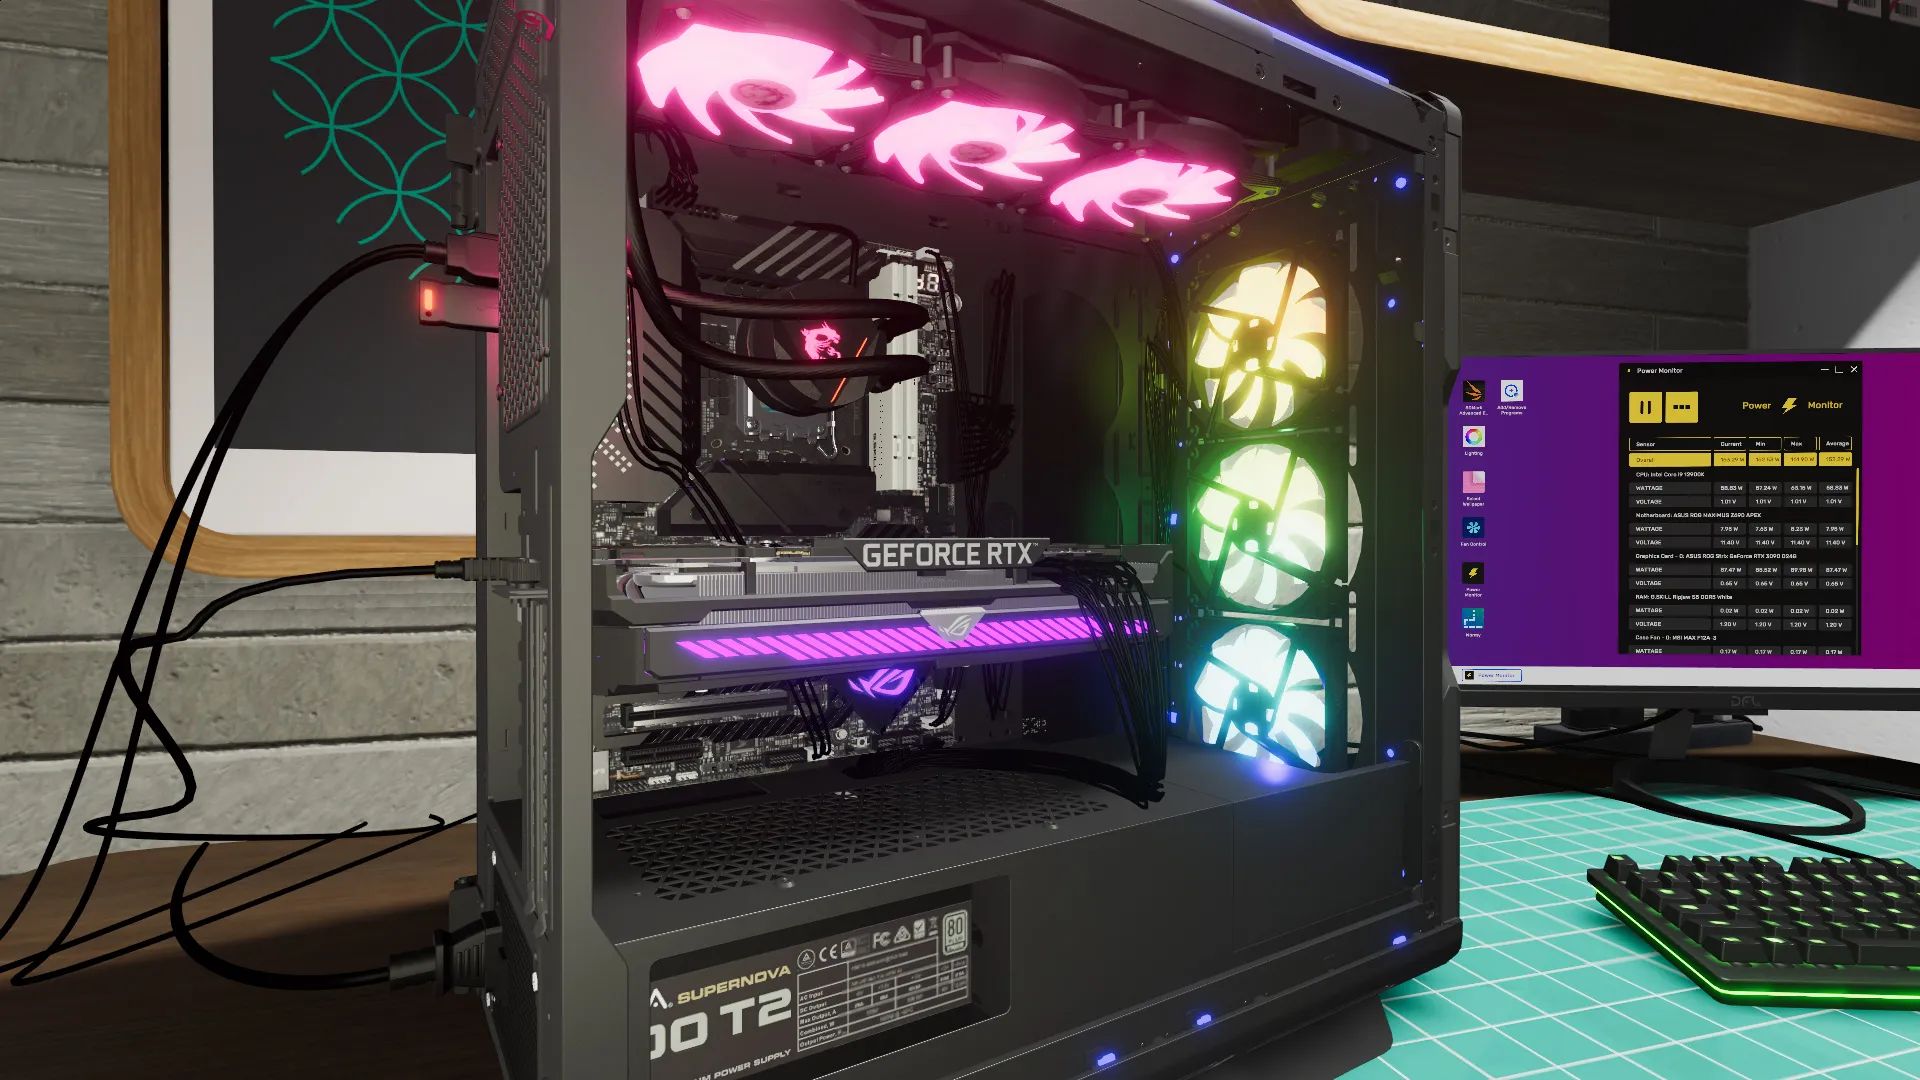 How To Change A Building PC Case To Another In PC Building Simulator